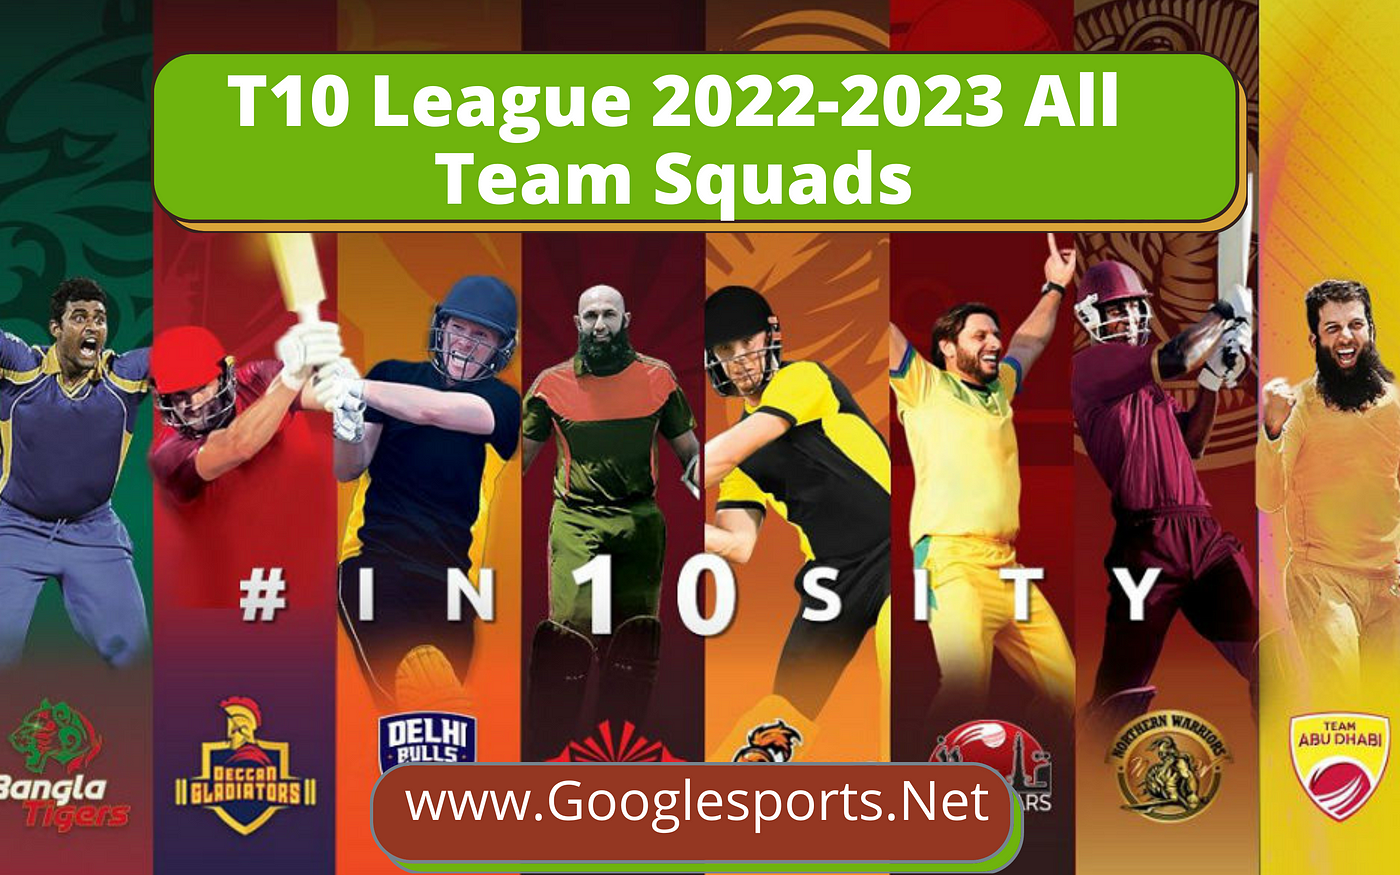 Abu Dhabi T10 League 2022 Squad Full Team And Player Lists by Googlesports Medium